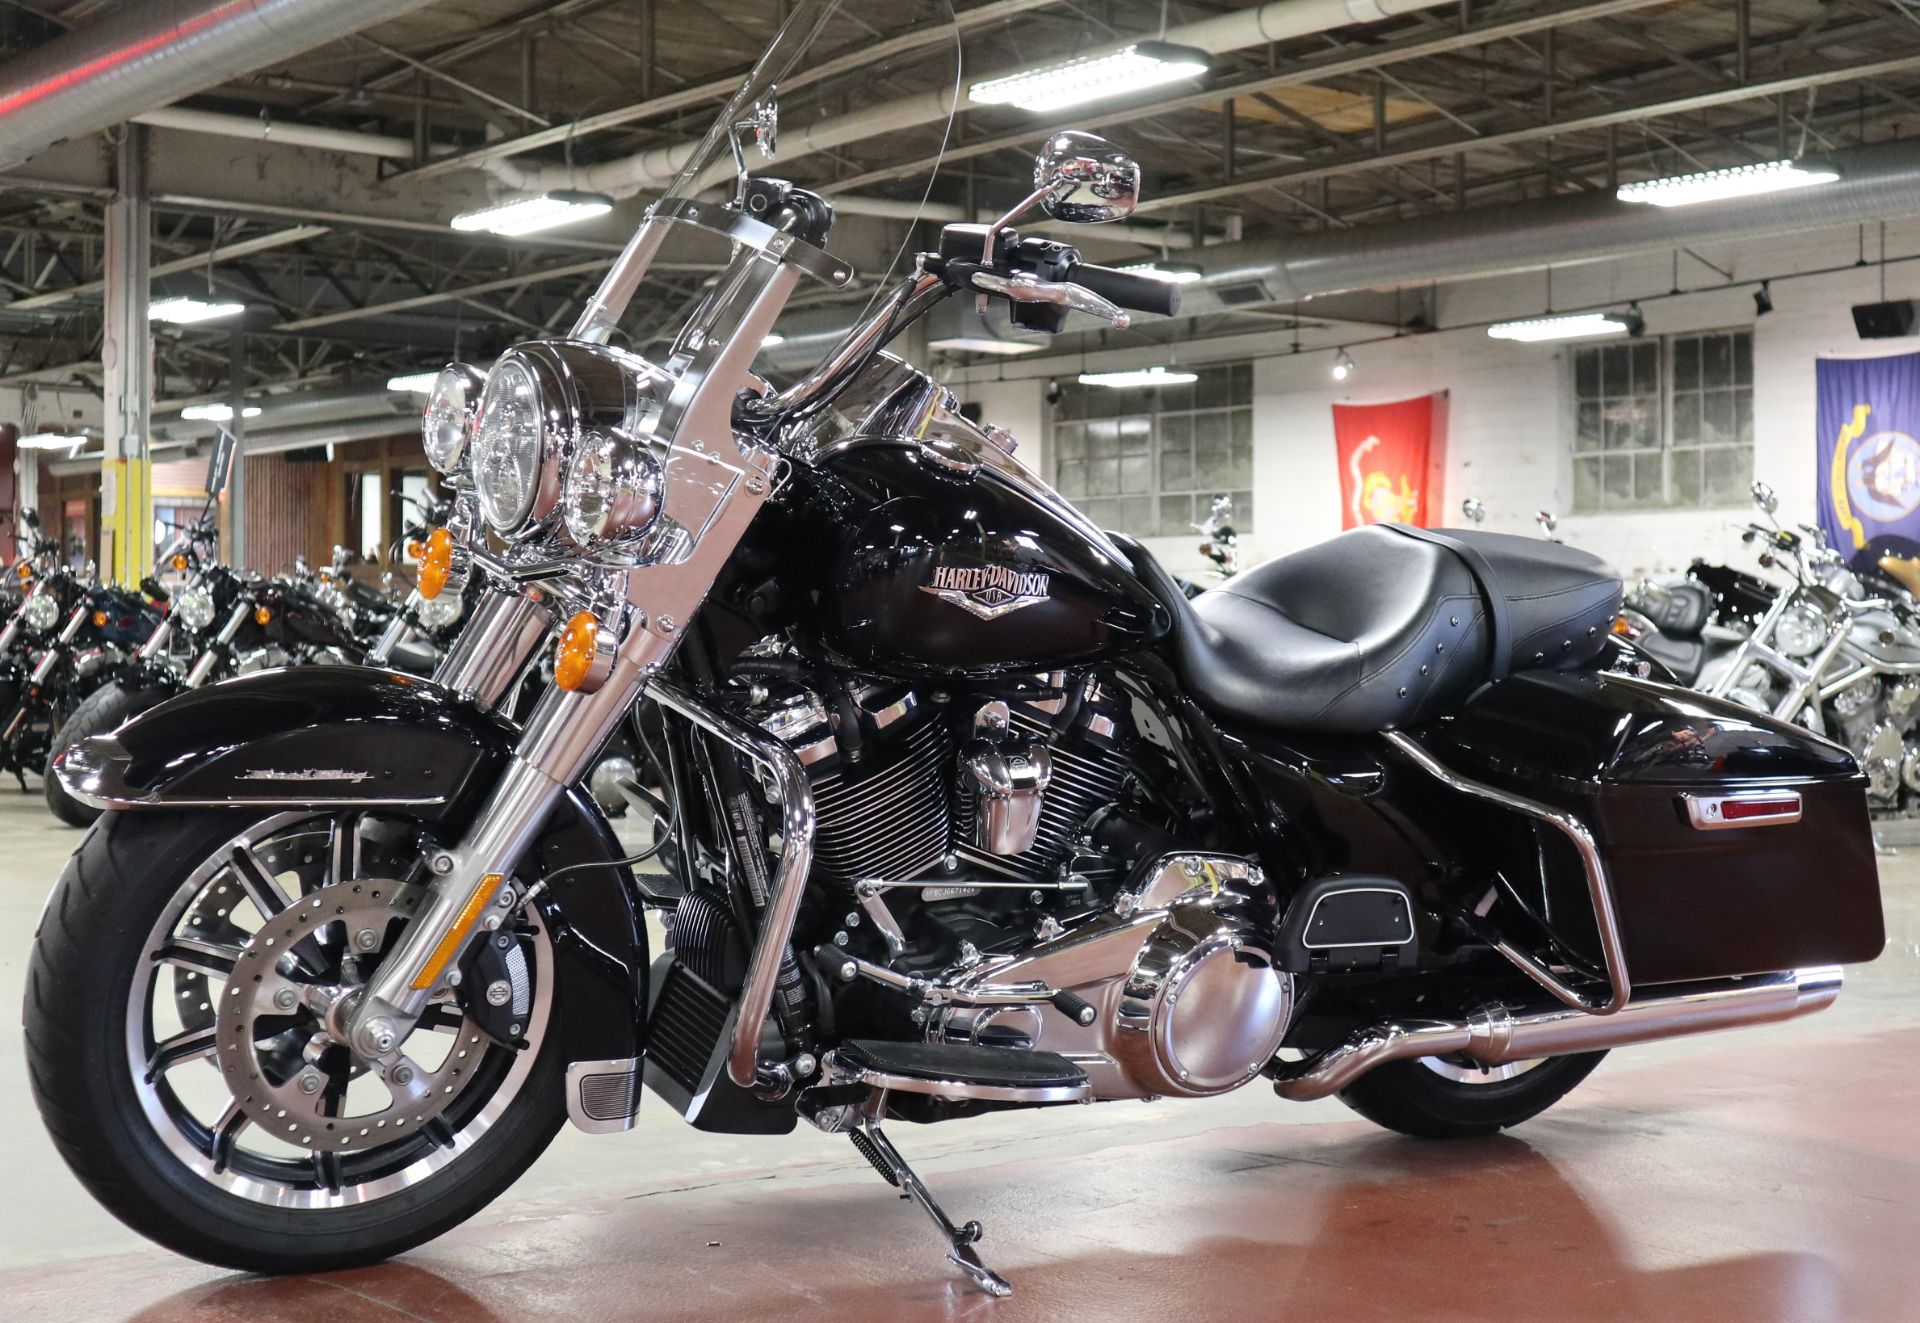 2018 Harley-Davidson Road King® in New London, Connecticut - Photo 4